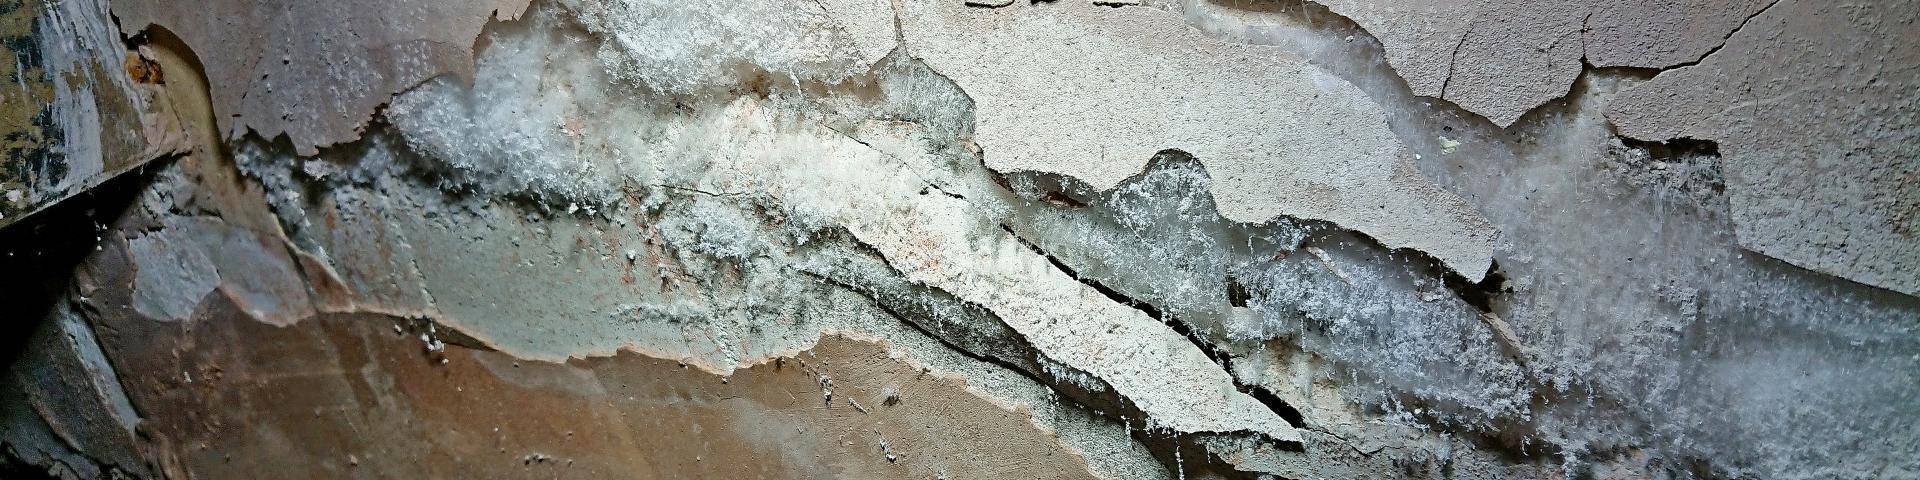 Crystallizing salts can create a lot of damage